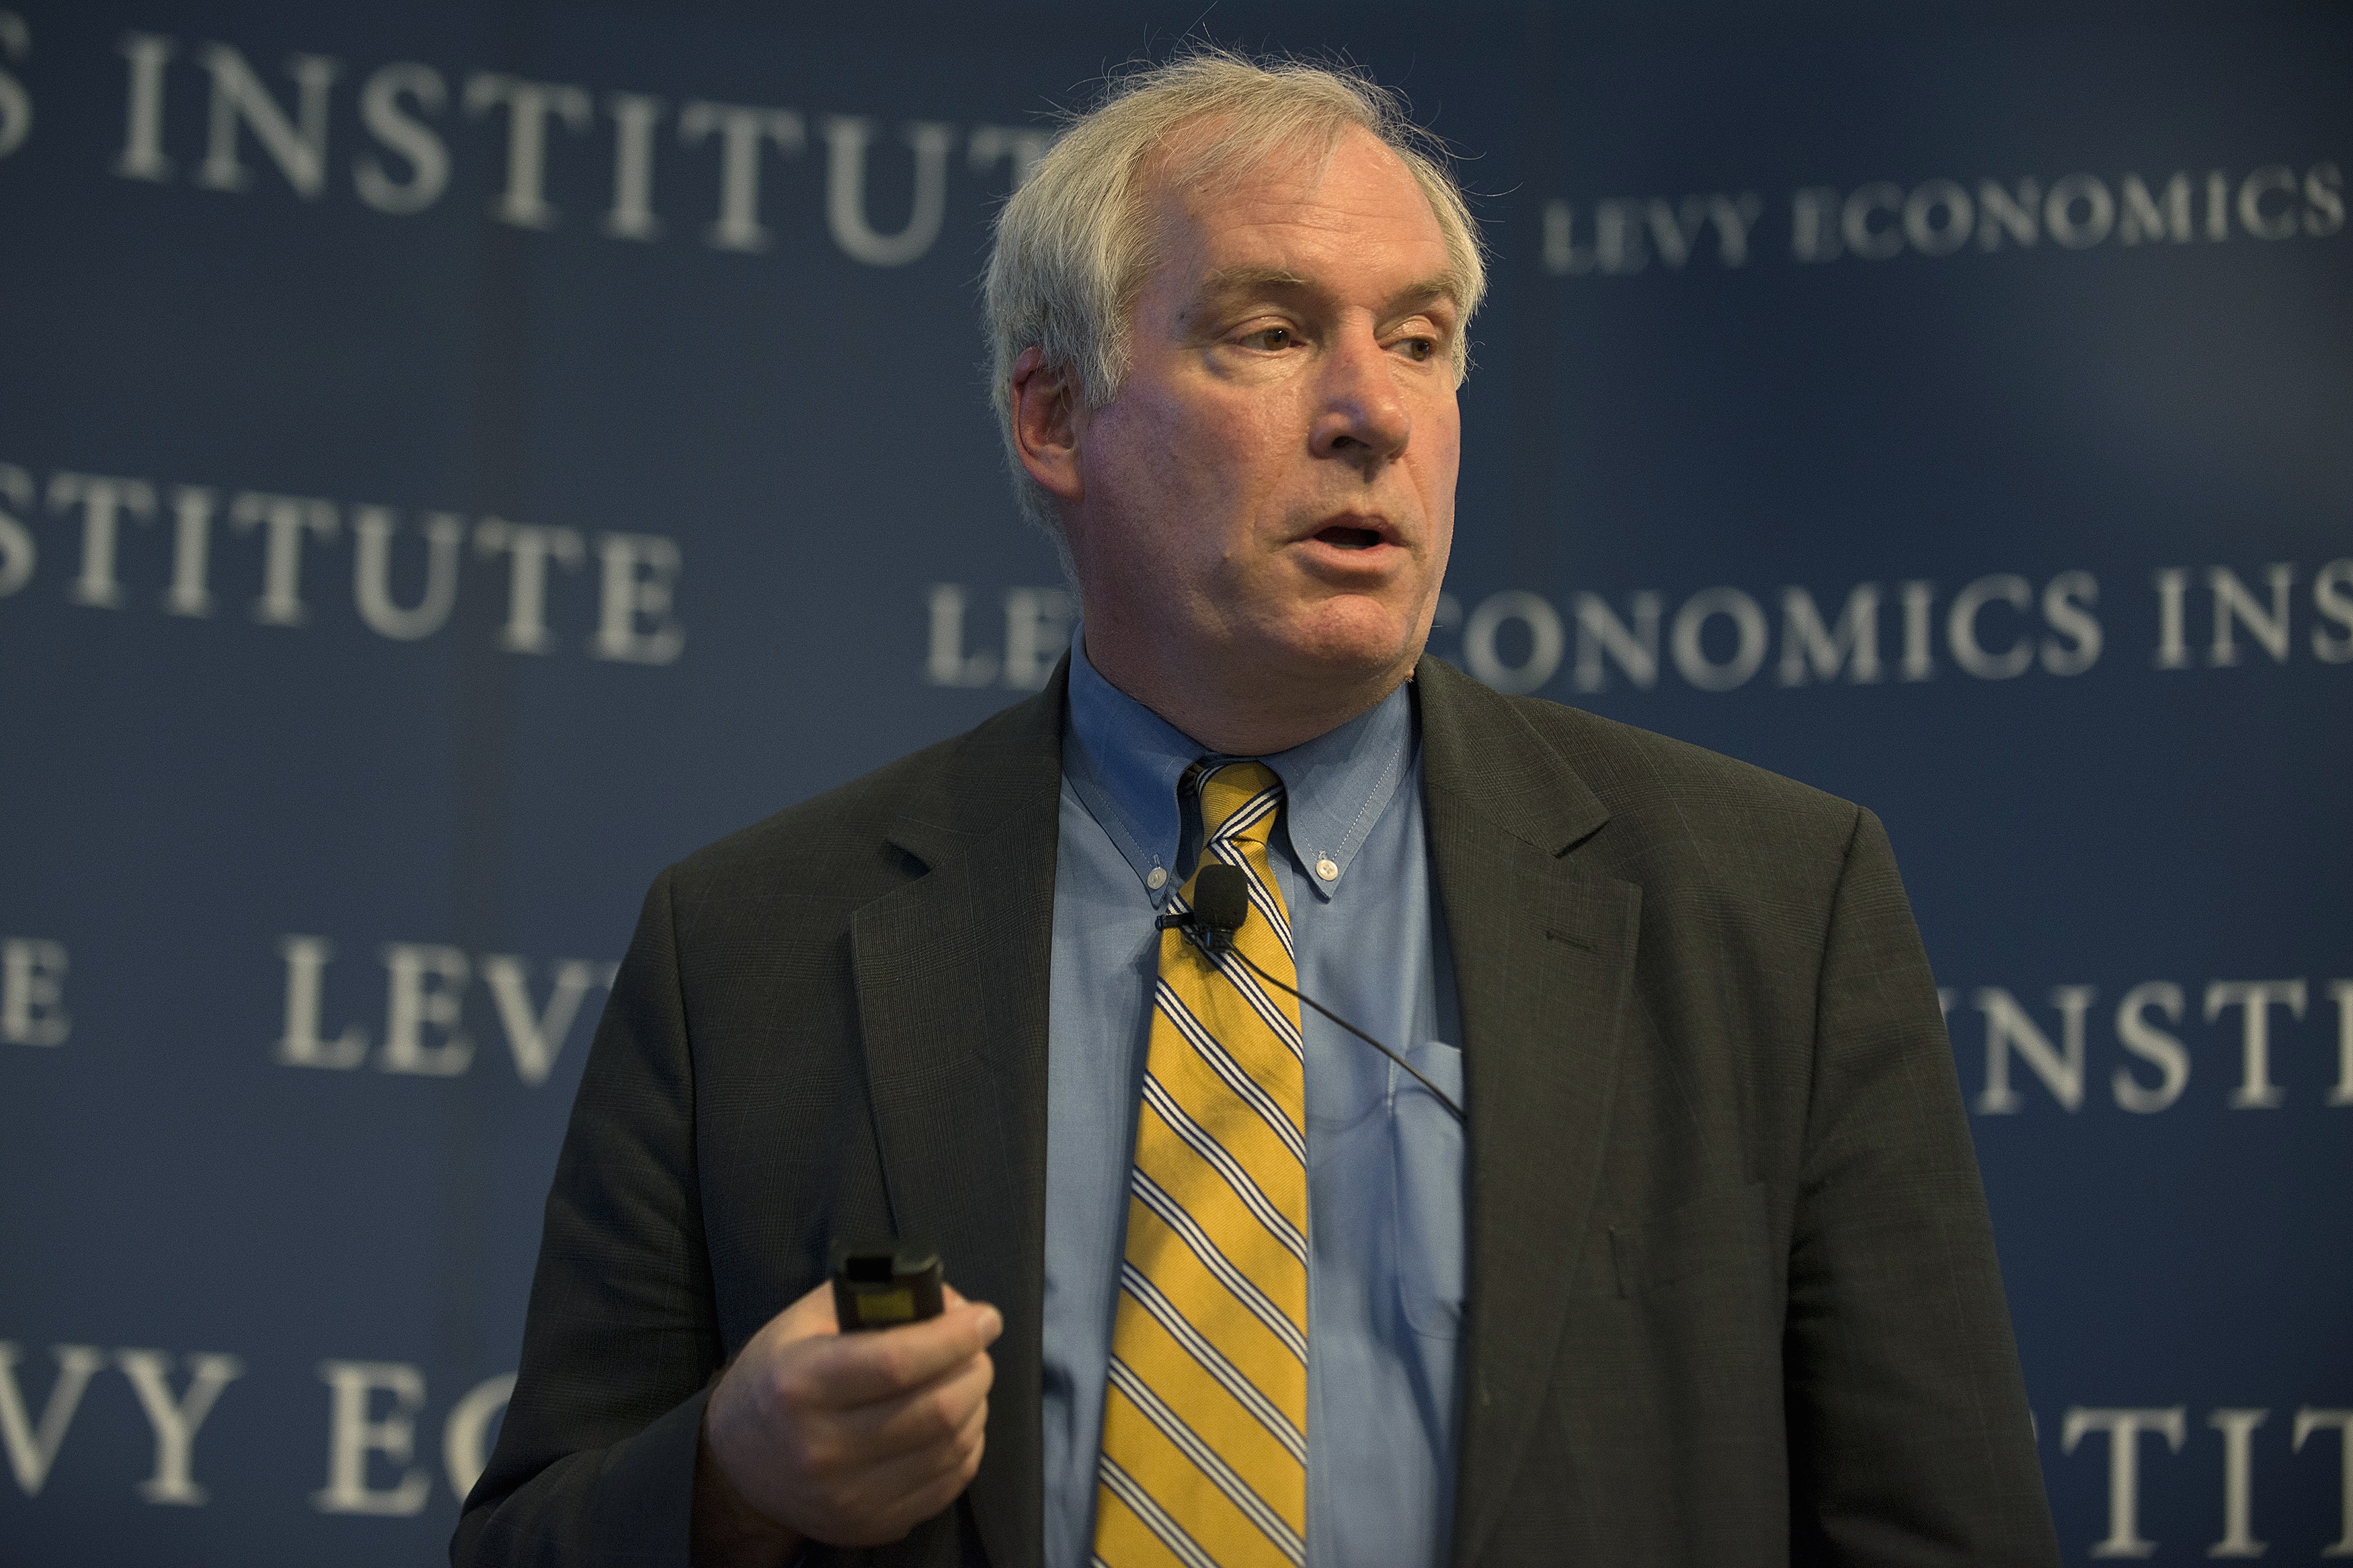 The Federal Reserve Bank of Boston's President and CEO Eric S. Rosengren speaks during the 